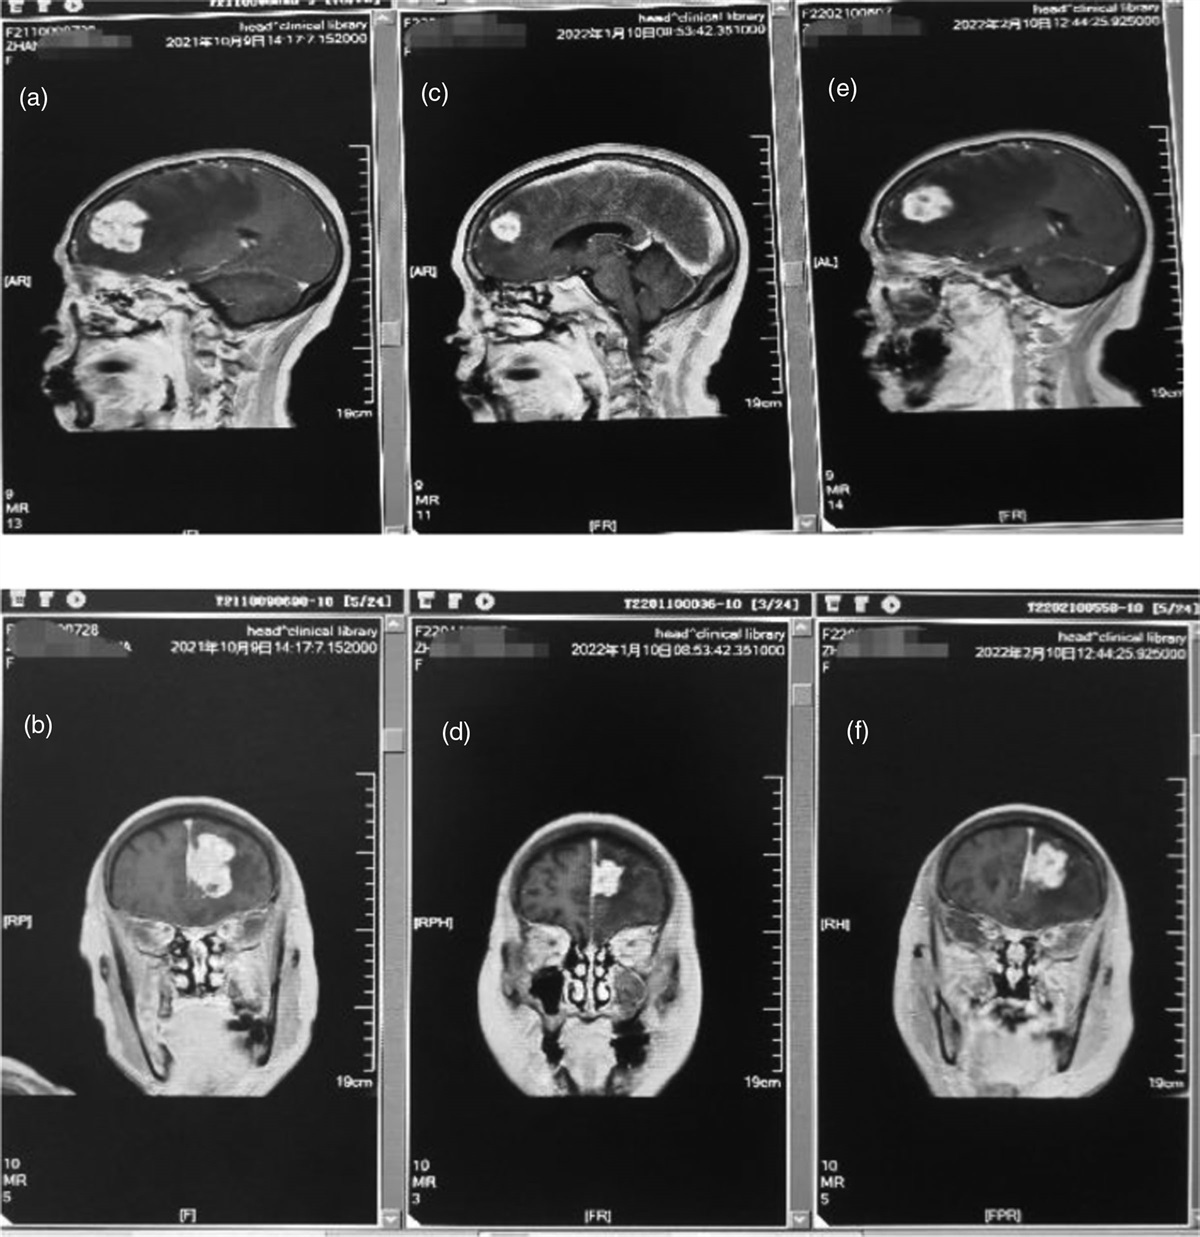 Combination toripalimab and bevacizumab for an elderly urothelial carcinoma patient with brain metastasis who failed rapidly after radiotherapy: a case report and literature review